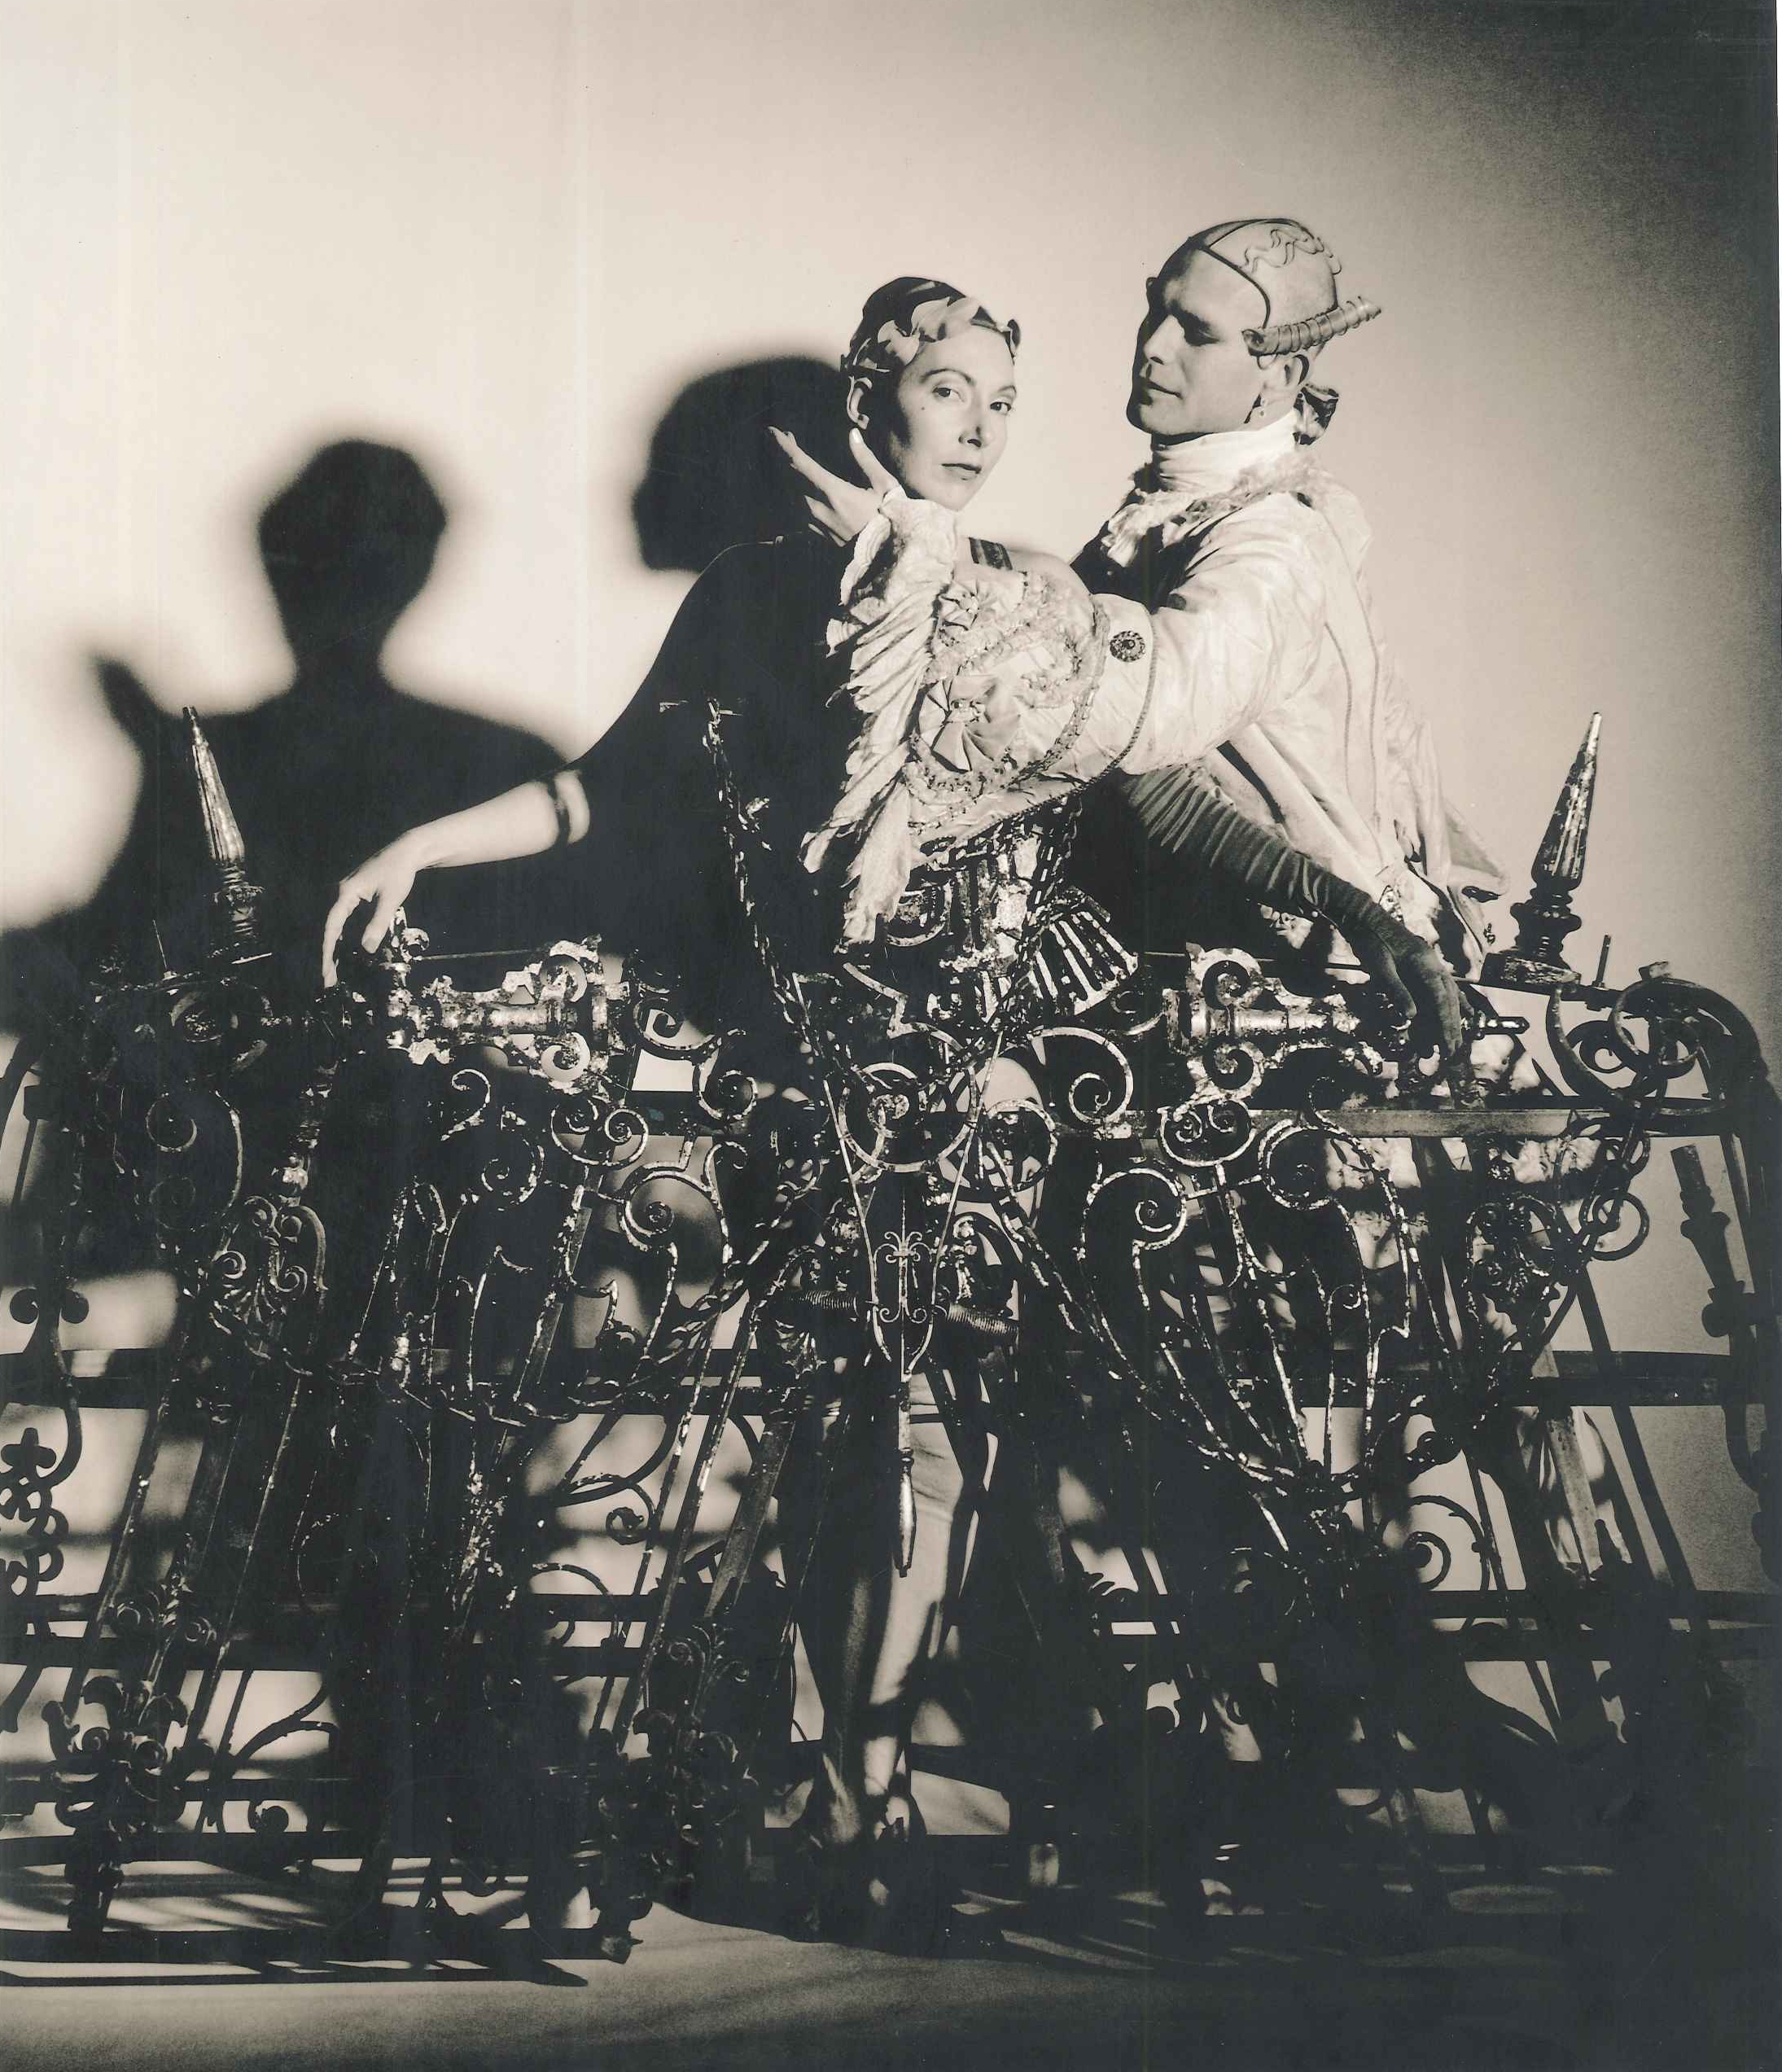 A sepia image of two performers dressed in ornate ruffled costumes stand delicately inside an elaborate waist-height cage